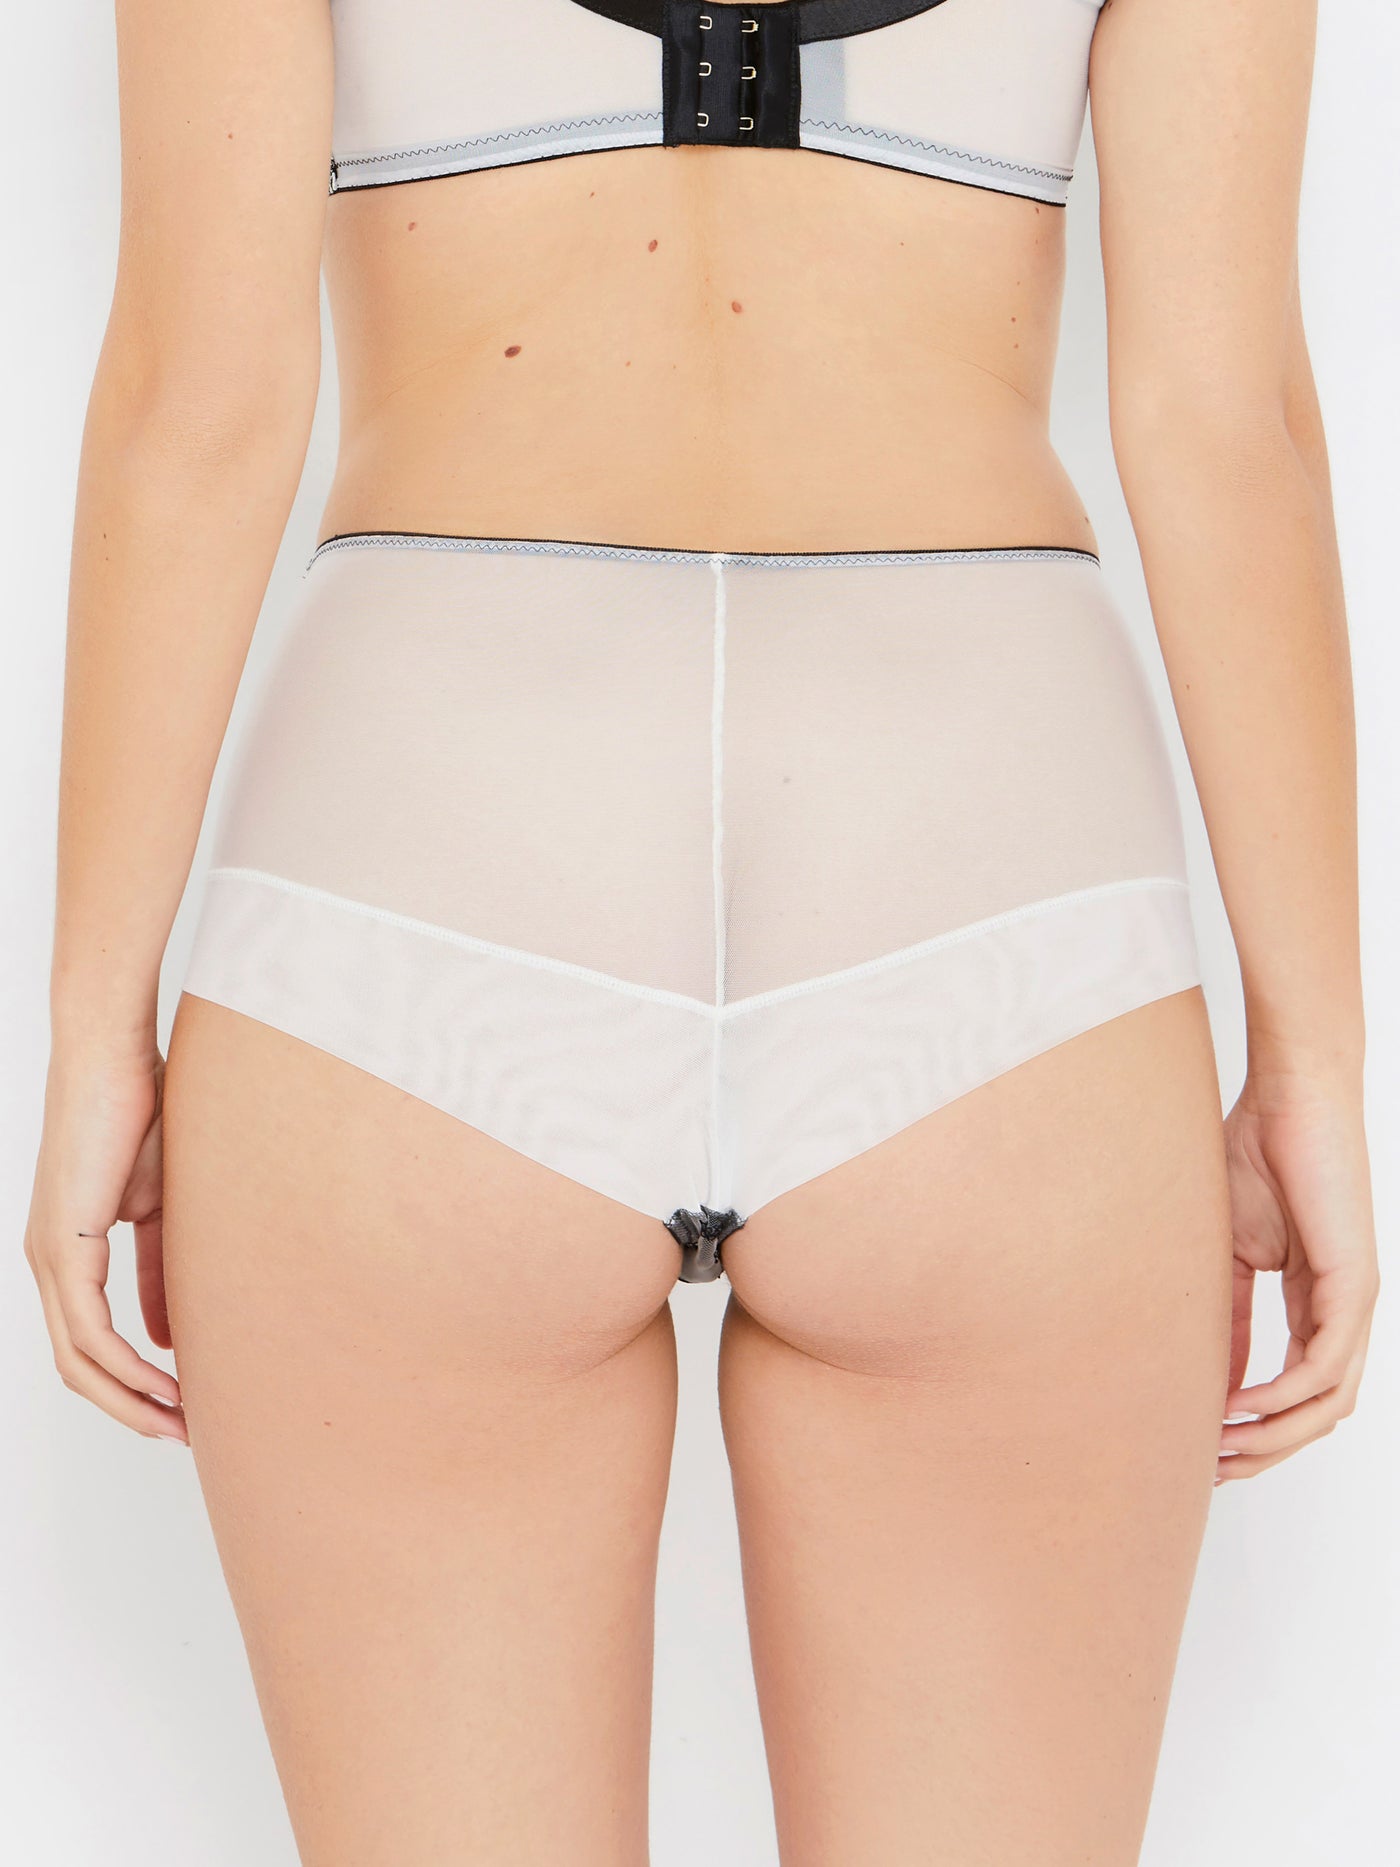 Cora black and white high waist knickers back view